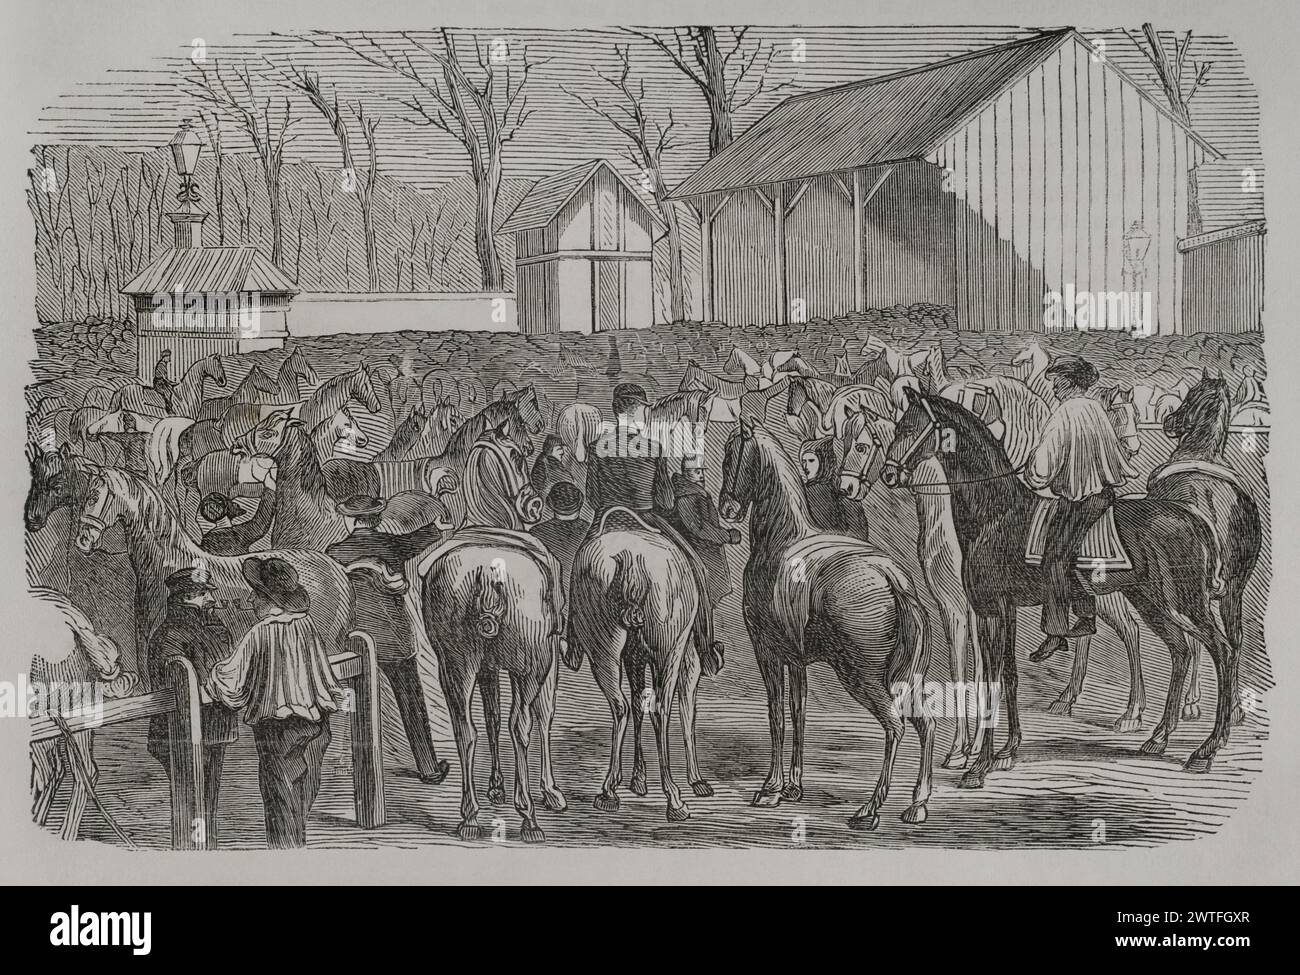 Franco-Prussian War (1870-1871). Siege of Paris (19 September 1870 to 28 January 1871). Horse market during the siege of the city by the Prussians. Engraving. 'Historia de la Guerra de Francia y Prusia' (History of the War between France and Prussia). Volume II. Published in Barcelona, 1871. Stock Photo